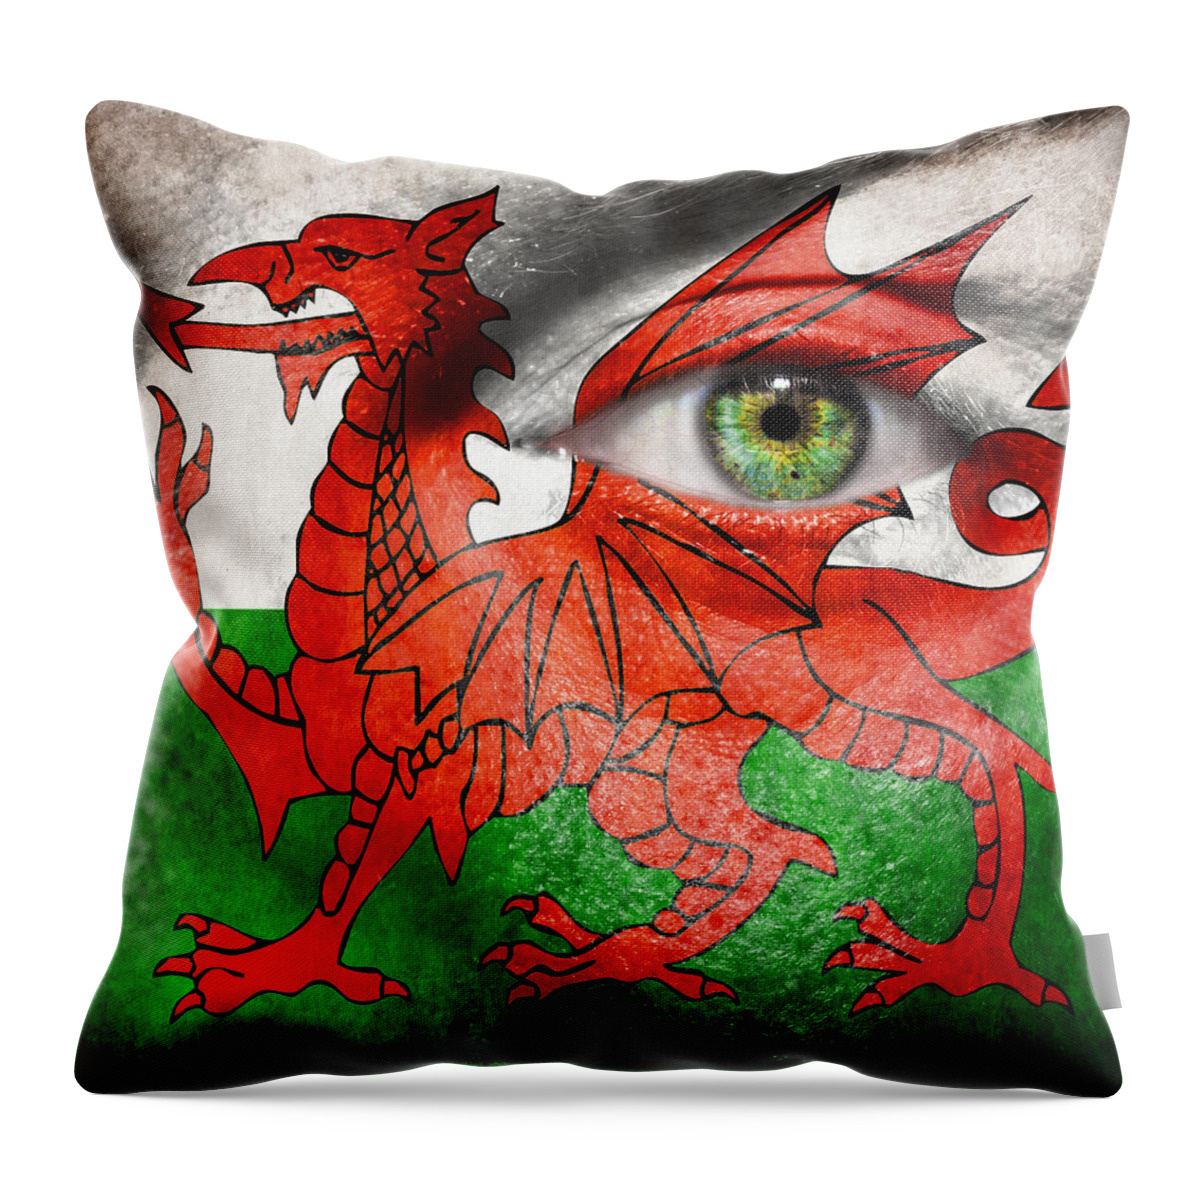 Art Throw Pillow featuring the photograph Go Wales by Semmick Photo